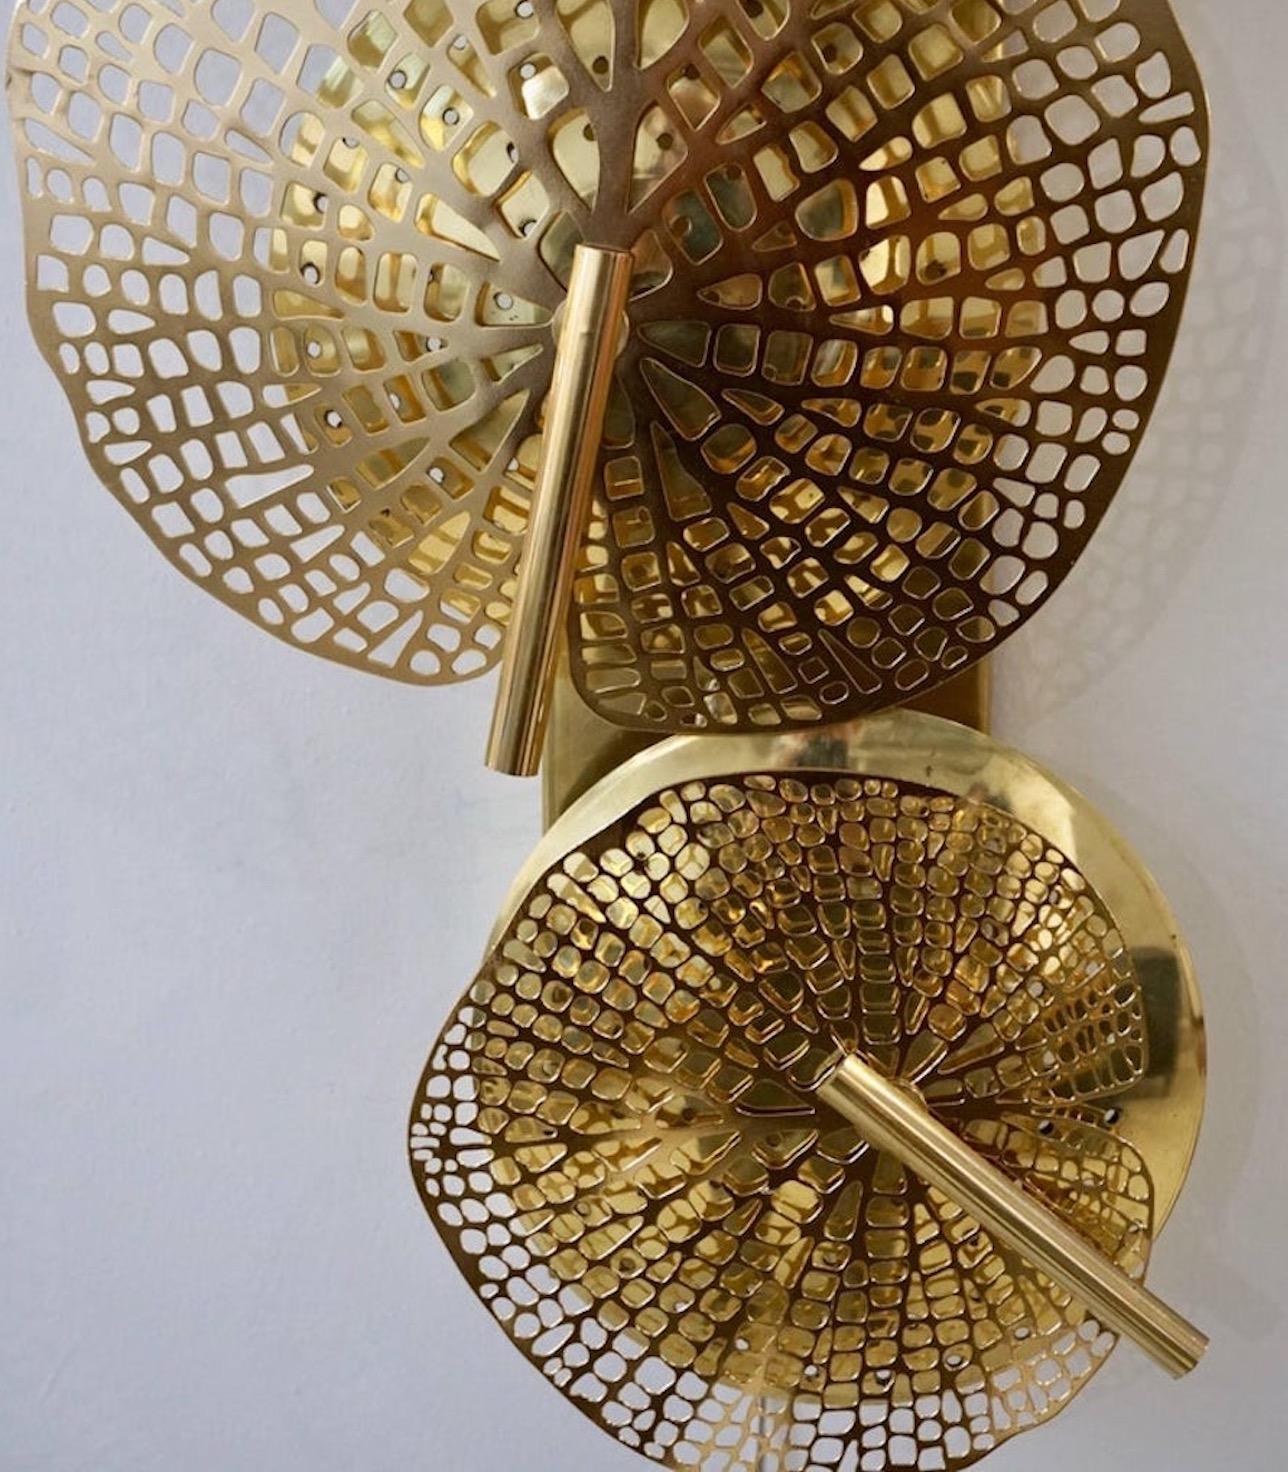 Contemporary Bespoke Organic Italian Art Design Perforated Brass Leaf Wall Light For Sale 4